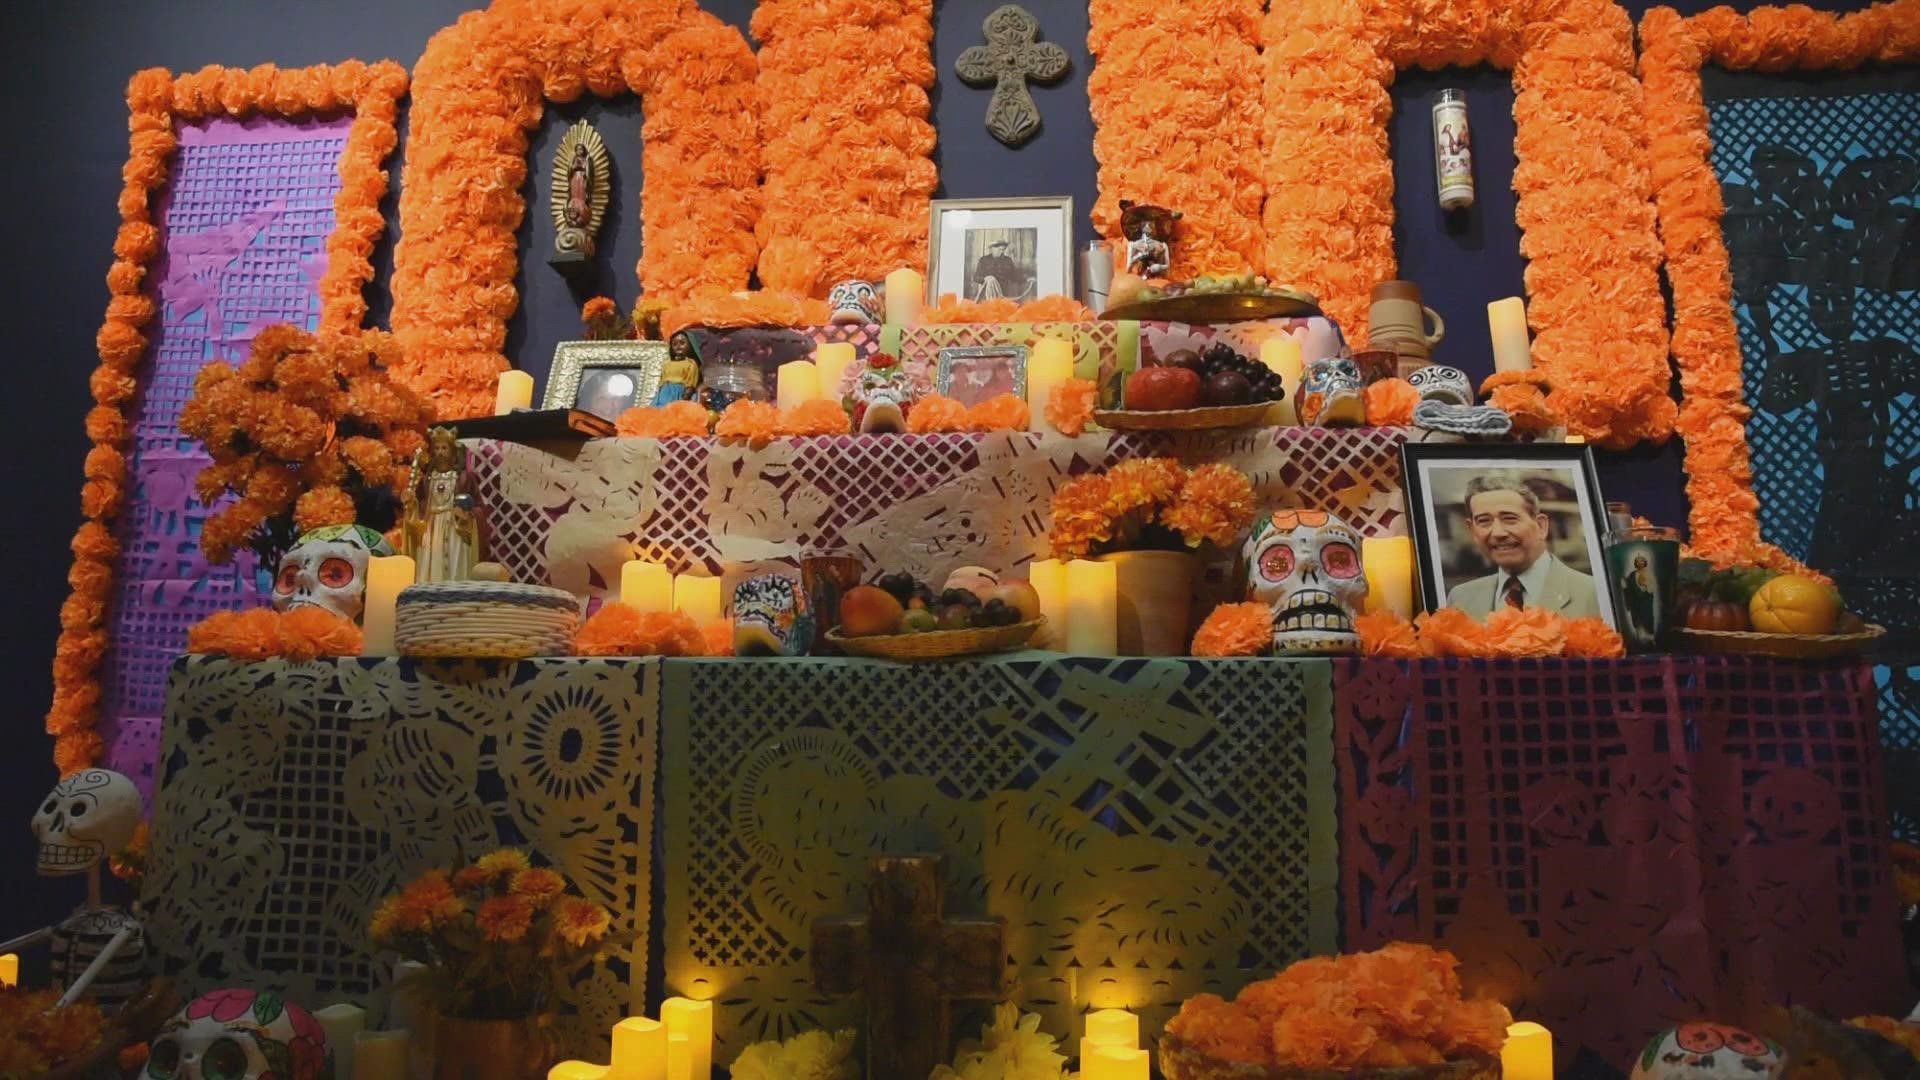 The exhibition called The Spirit of Día de los Muertos opens on Aug. 26 and runs until Dec. 11. It honors the Mexican tradition of Day of the Dead.